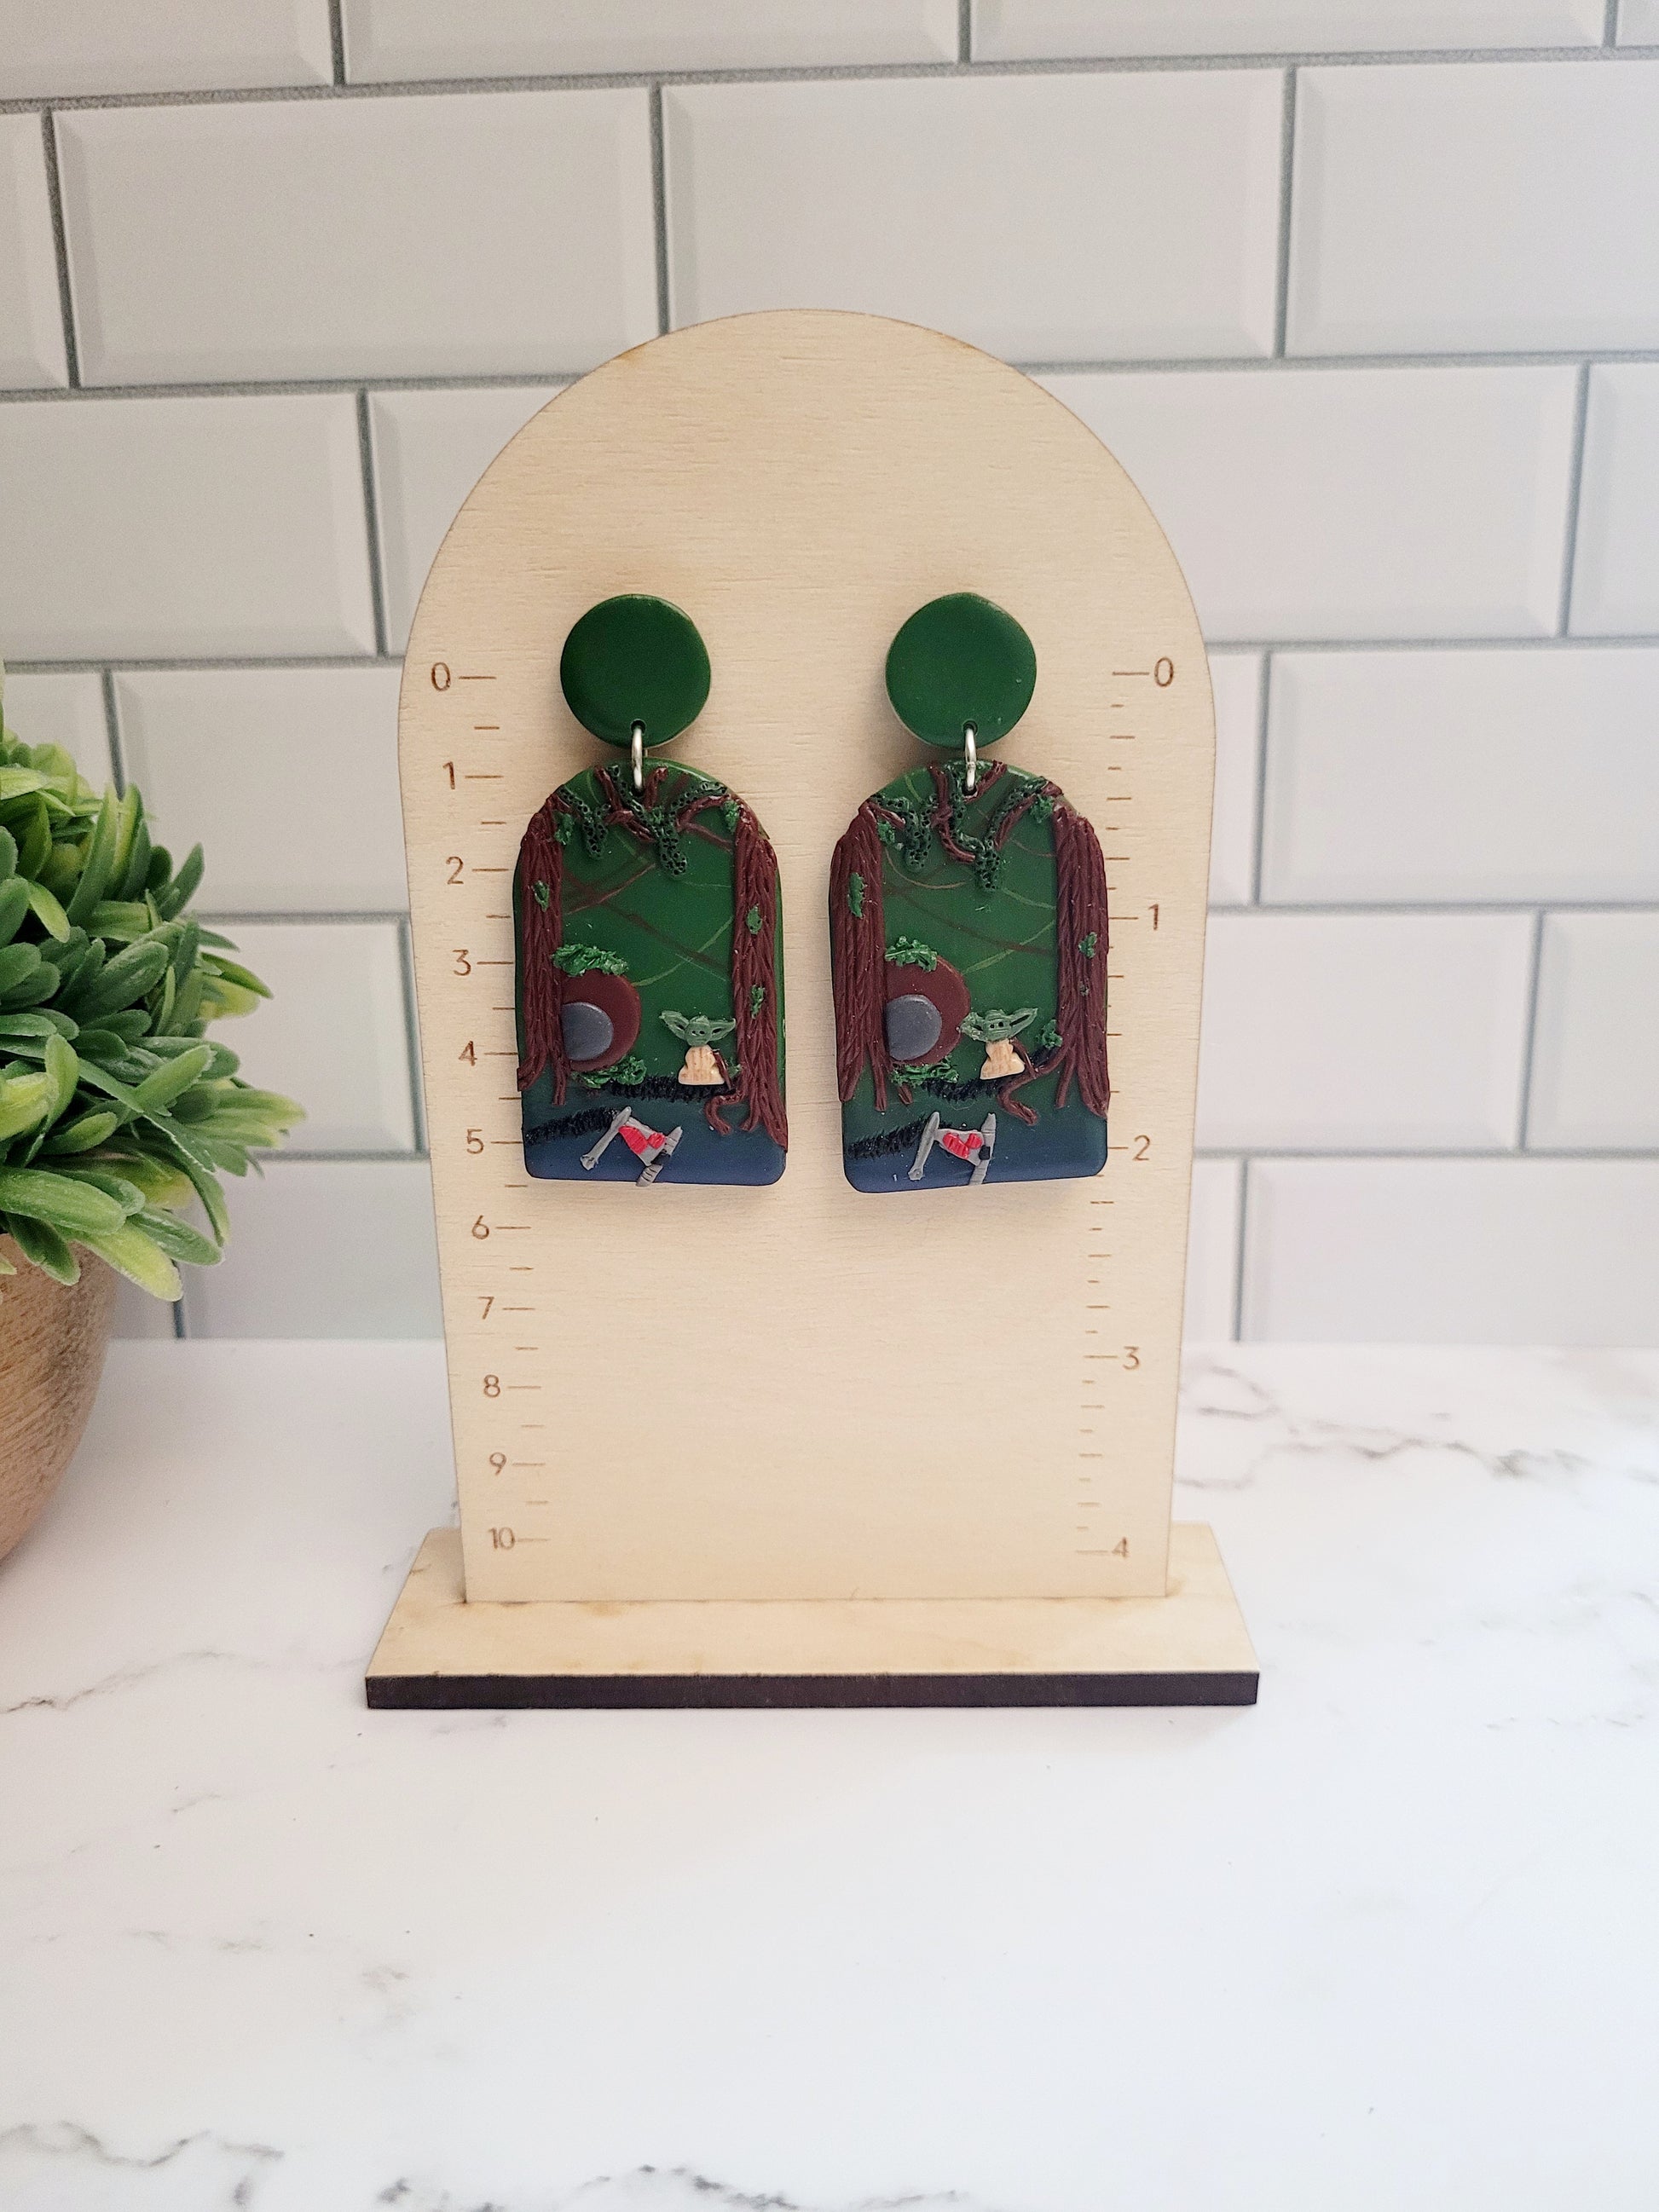 Arch earrings with a swamp landscape on a ruler